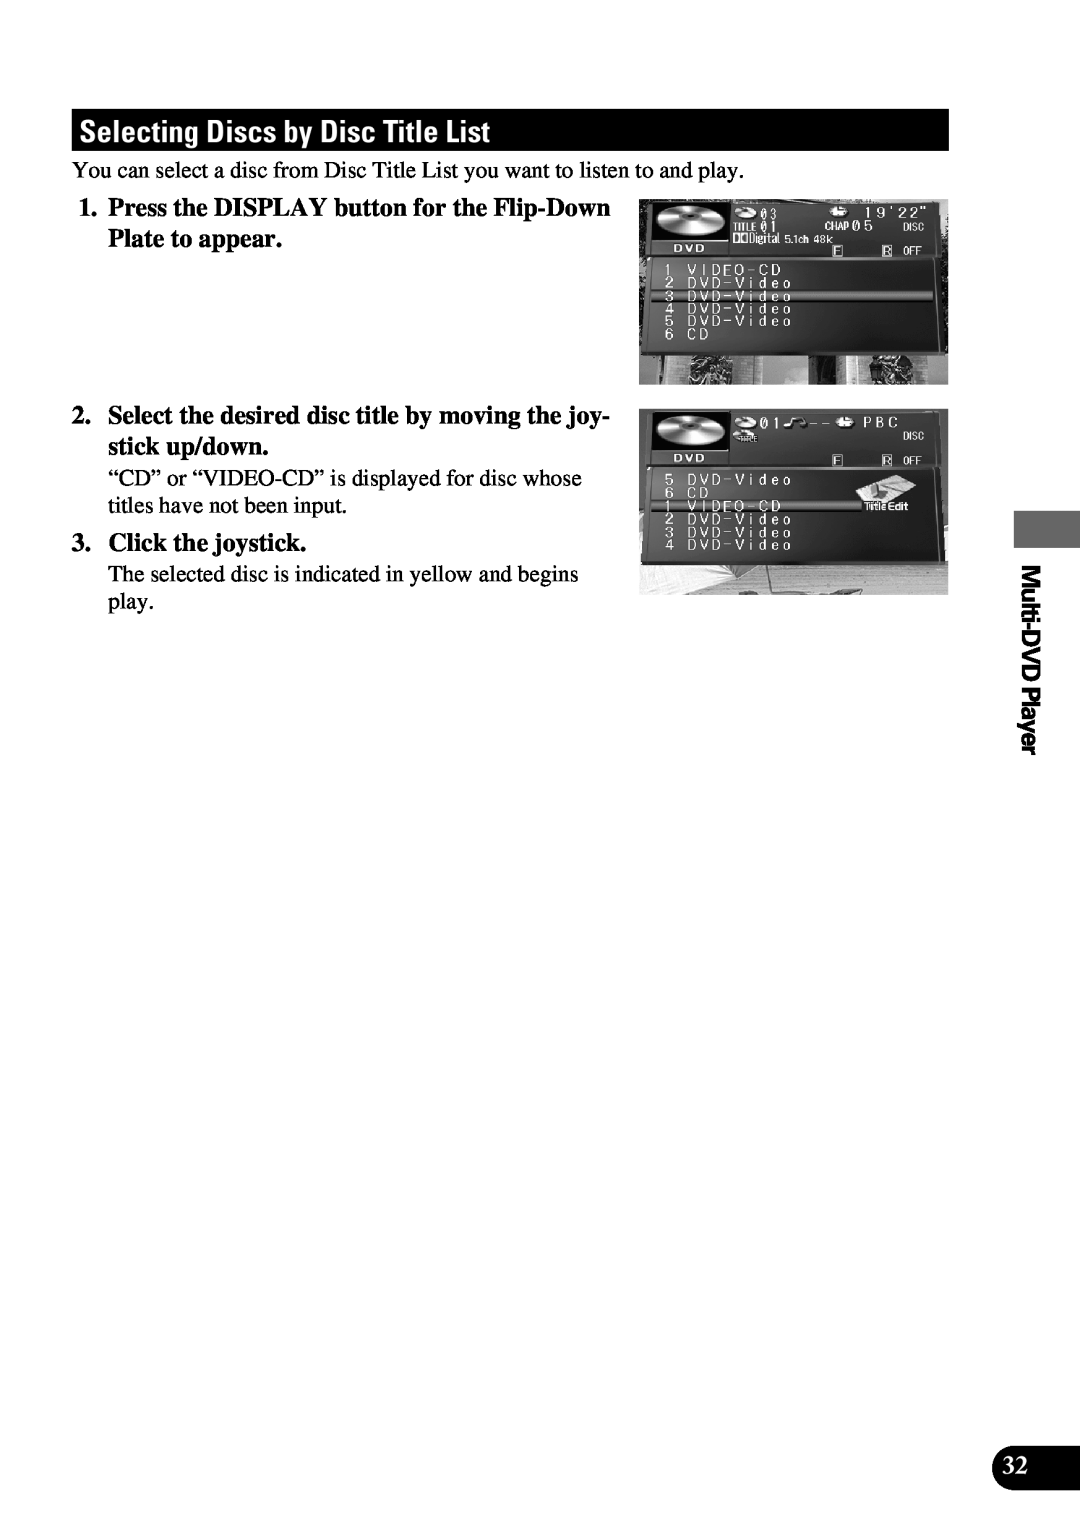 Pioneer AVM-P9000 owner manual Selecting Discs by Disc Title List, Click the joystick, Multi-DVDPlayer, Continued overleaf 